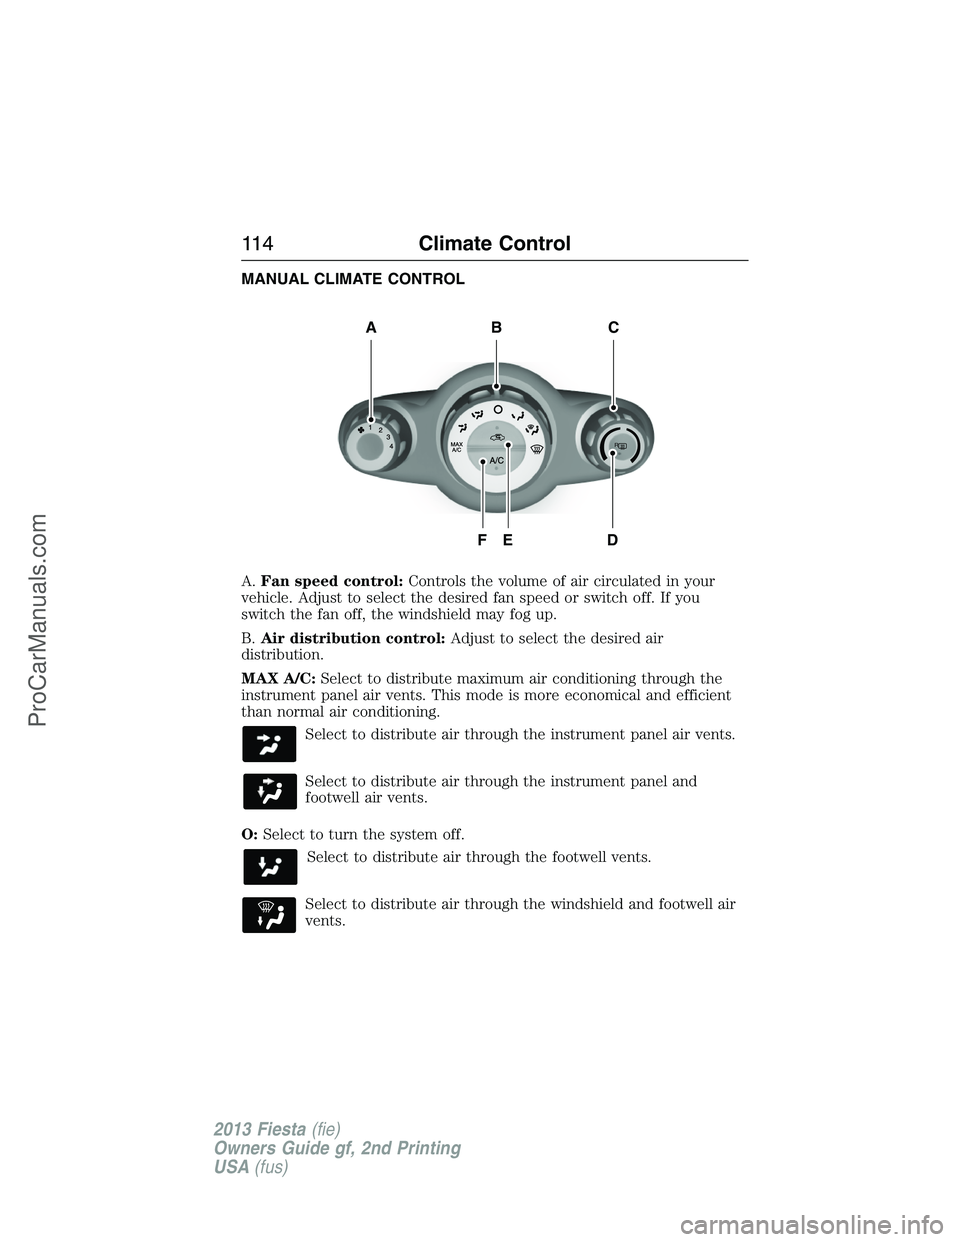 FORD FIESTA 2013  Owners Manual MANUAL CLIMATE CONTROL
A.Fan speed control:Controls the volume of air circulated in your
vehicle. Adjust to select the desired fan speed or switch off. If you
switch the fan off, the windshield may fo